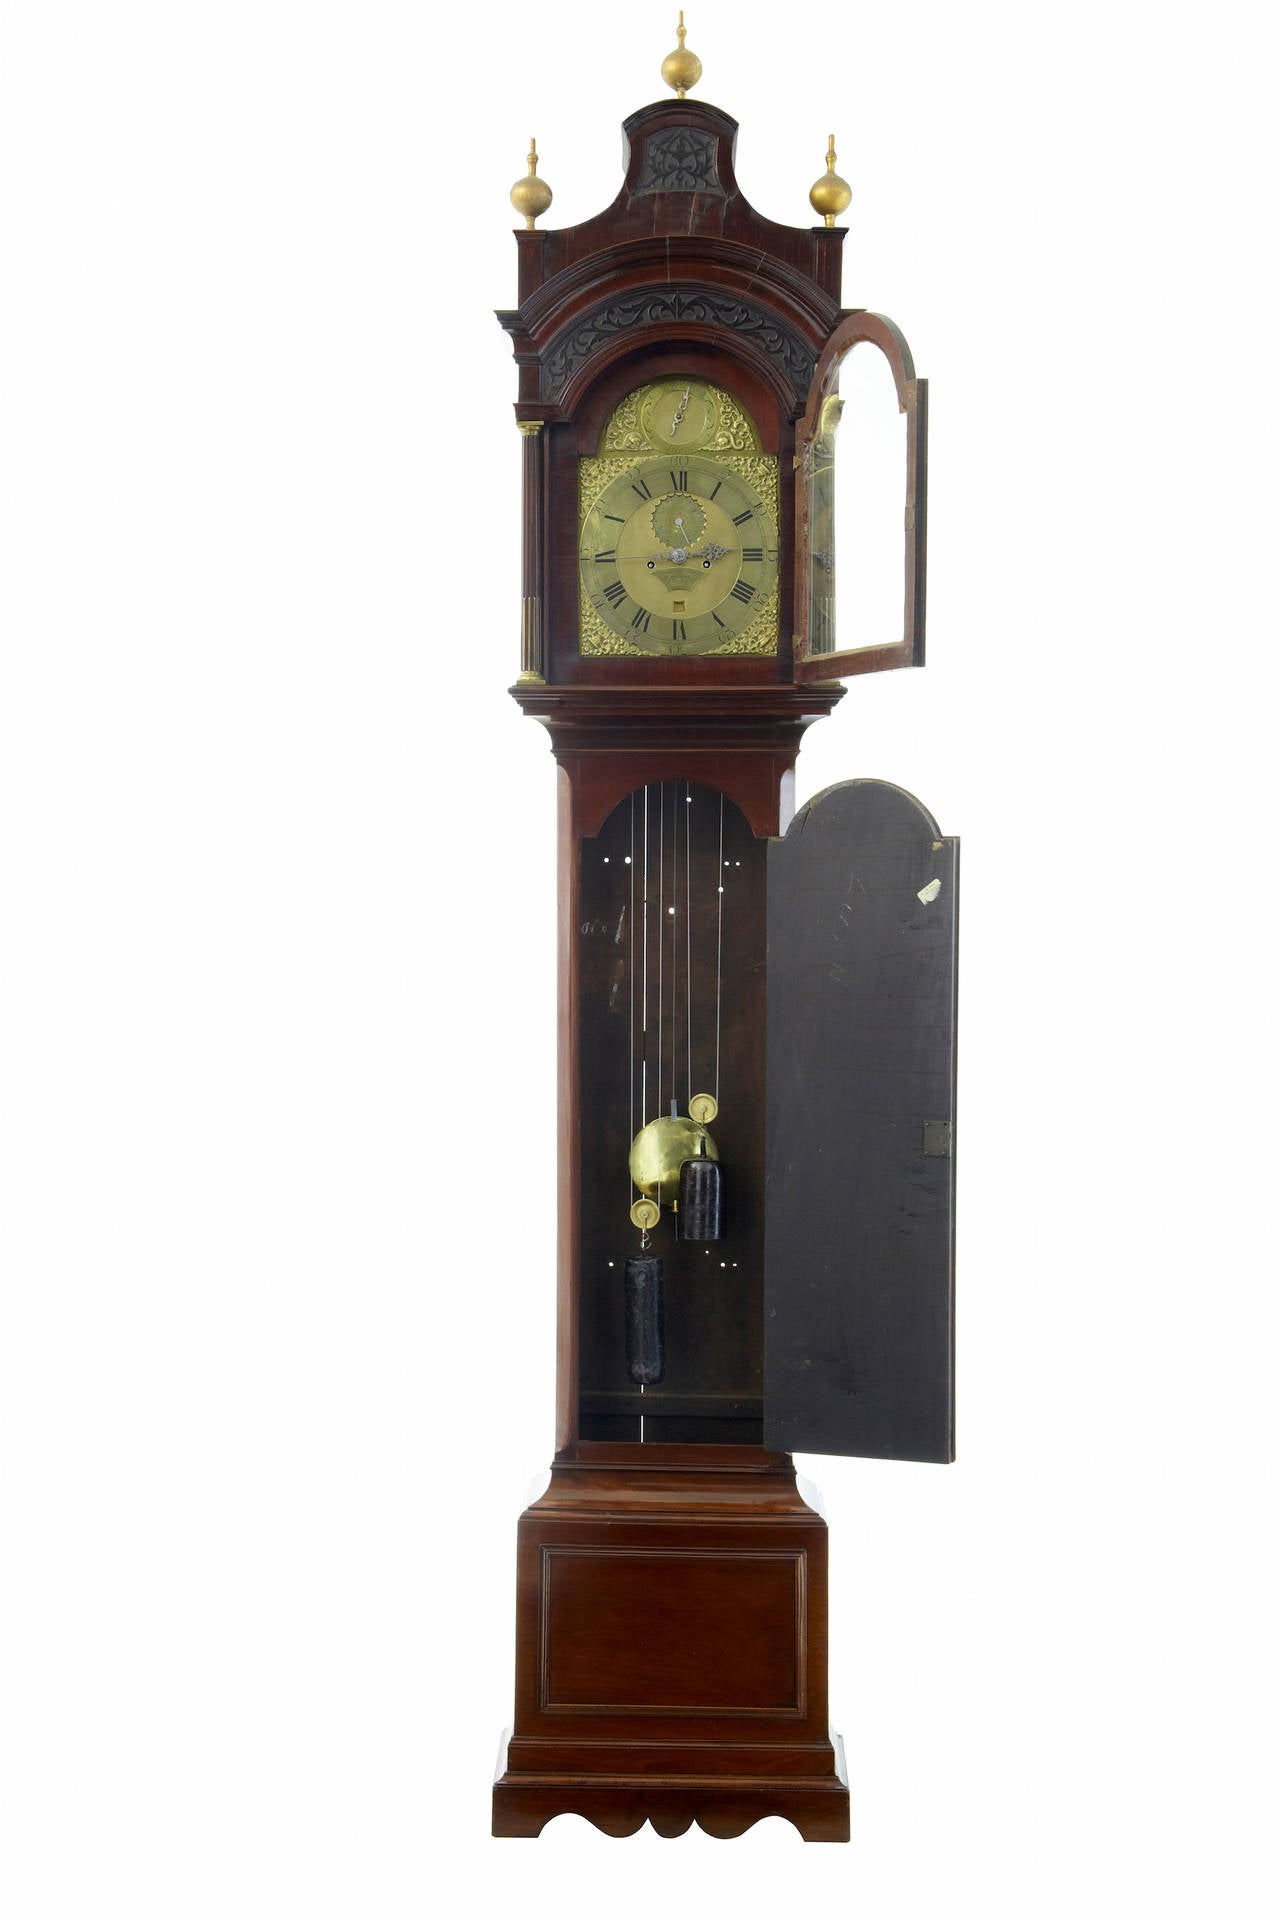 Stunning London longcase clock, circa 1760.The clock with makers mark Conyers Dunlop london, who became a apprentice in 1725 before becoming a master clockmaker in 1758. The movement has been professionally restored. Stunning carved hood,